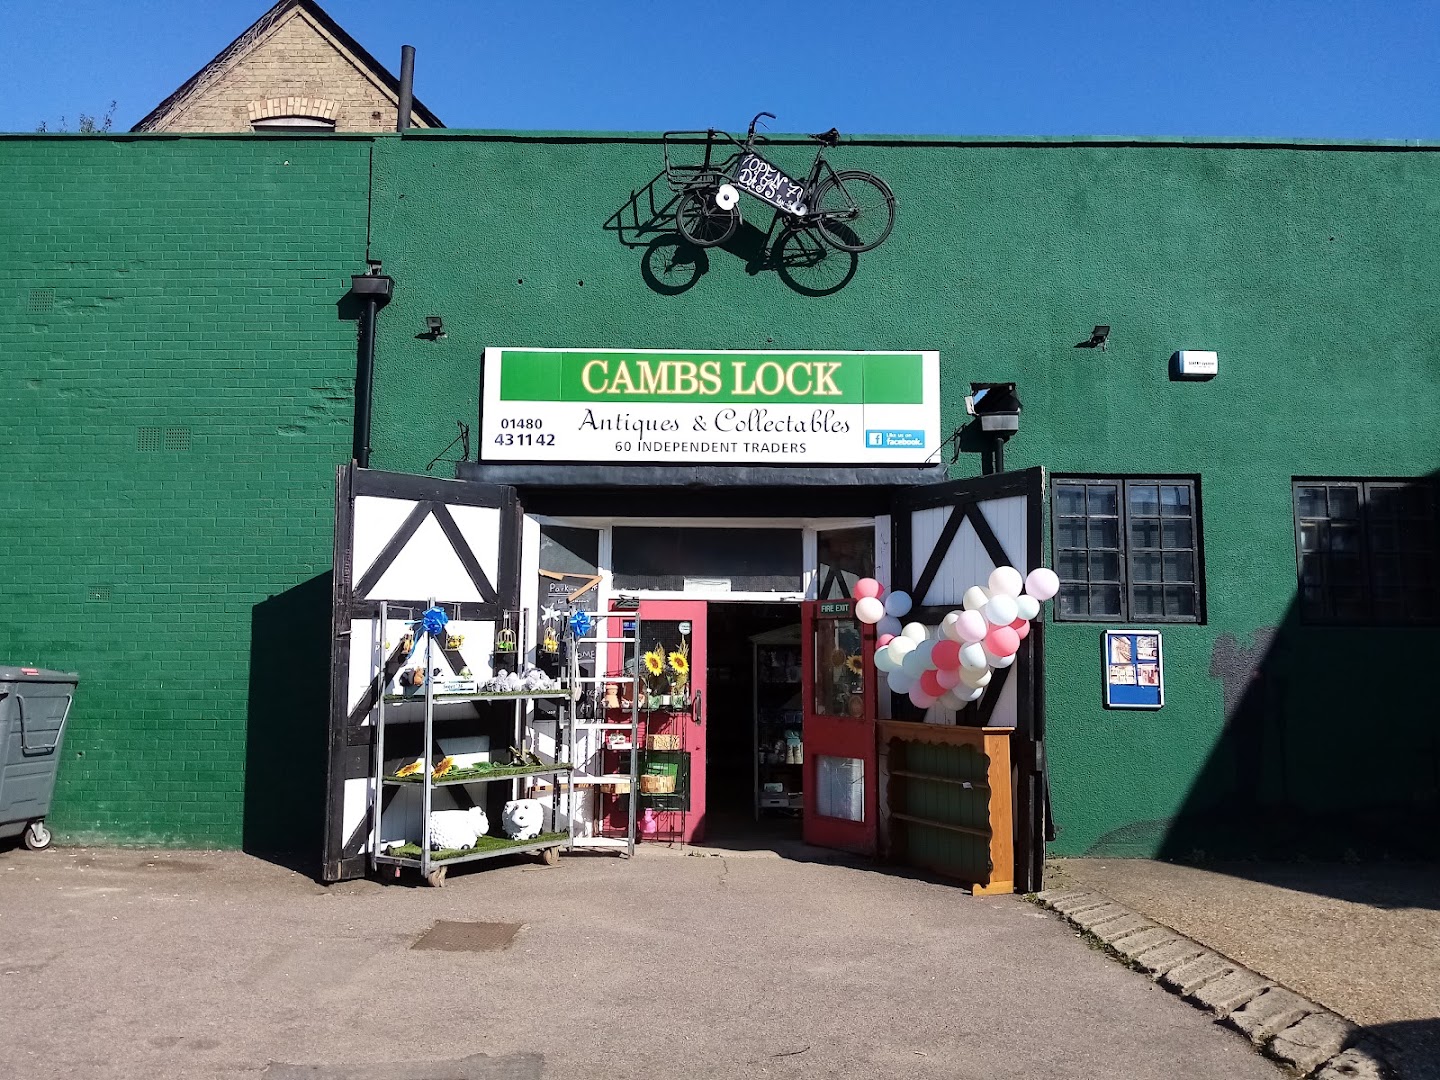 Cambs Lock Antiques & Collectables